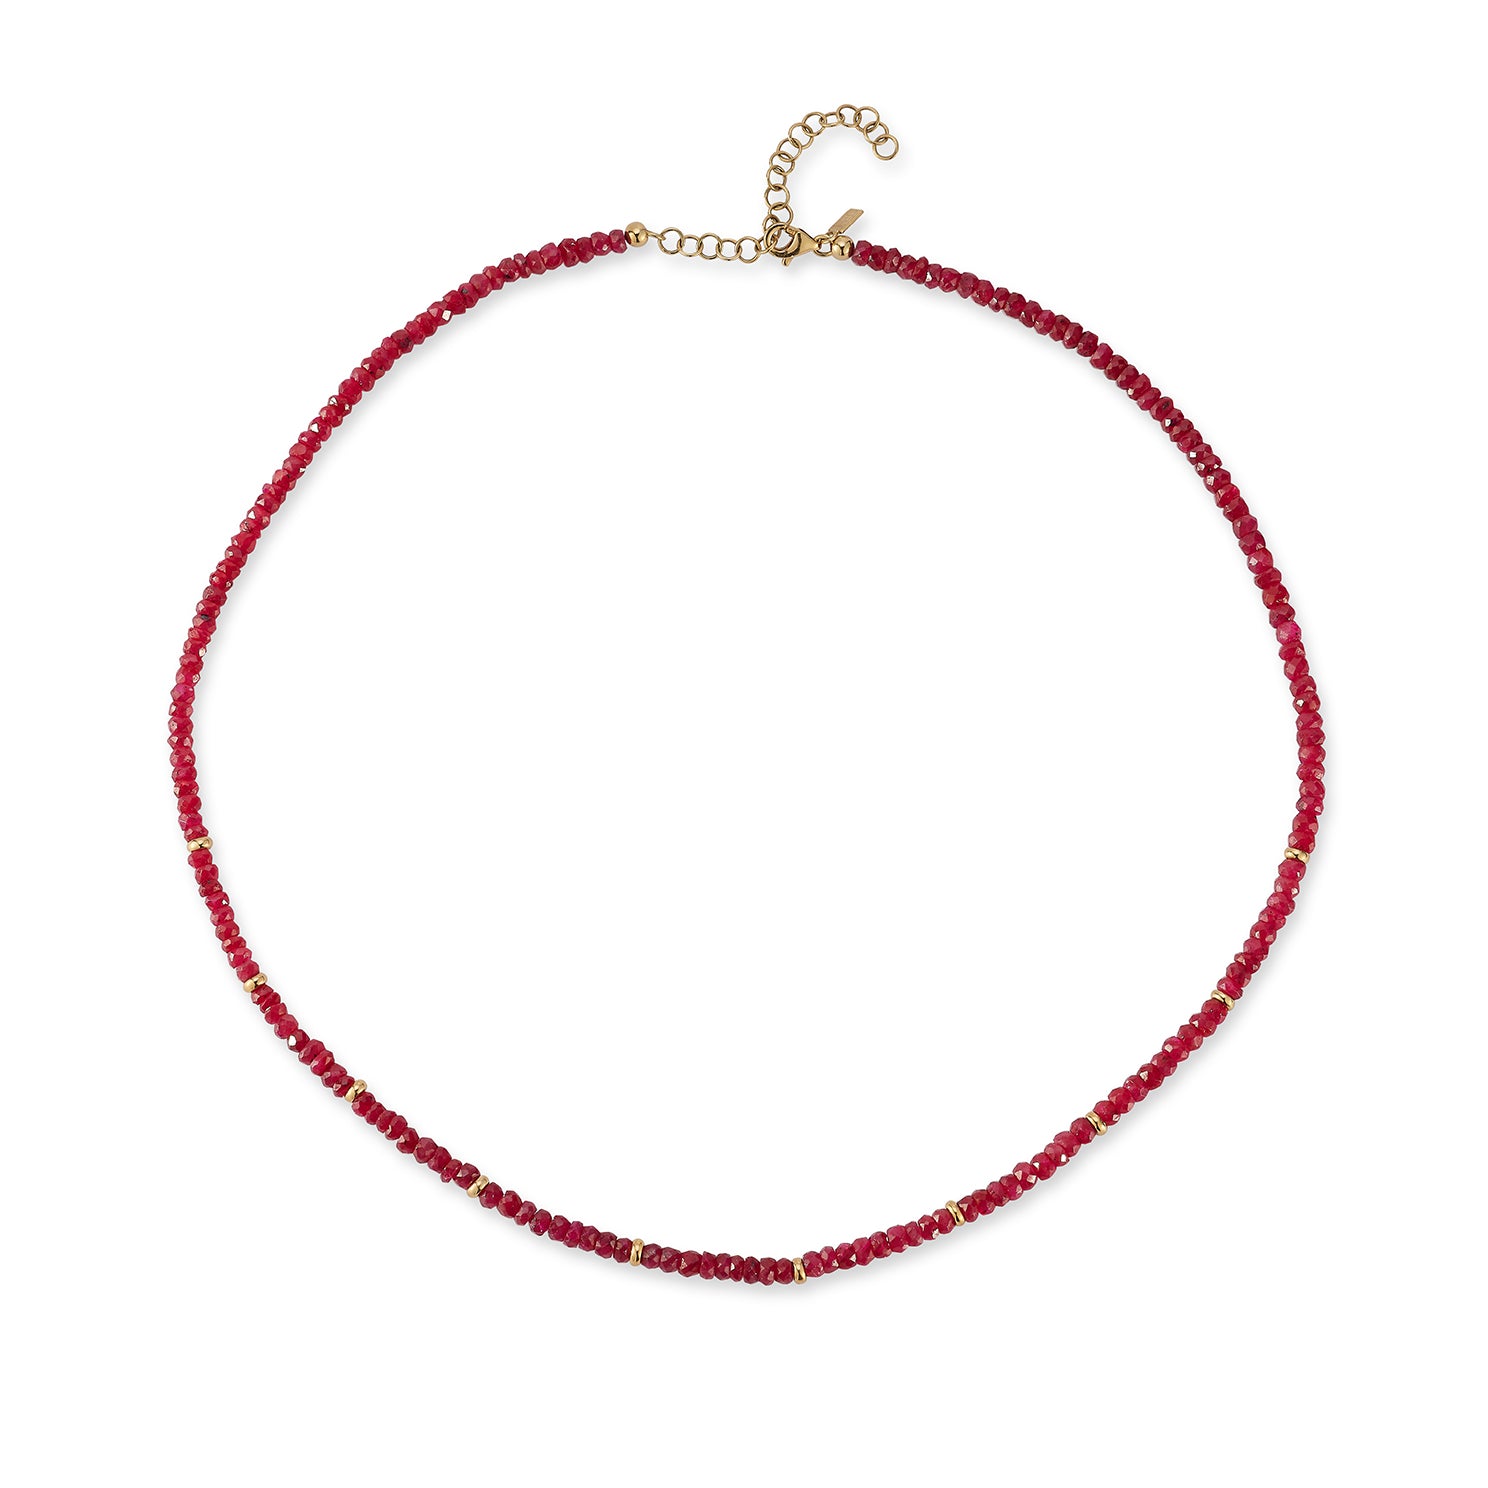 Birthstone Bead Necklace In Ruby in 14k yellow gold